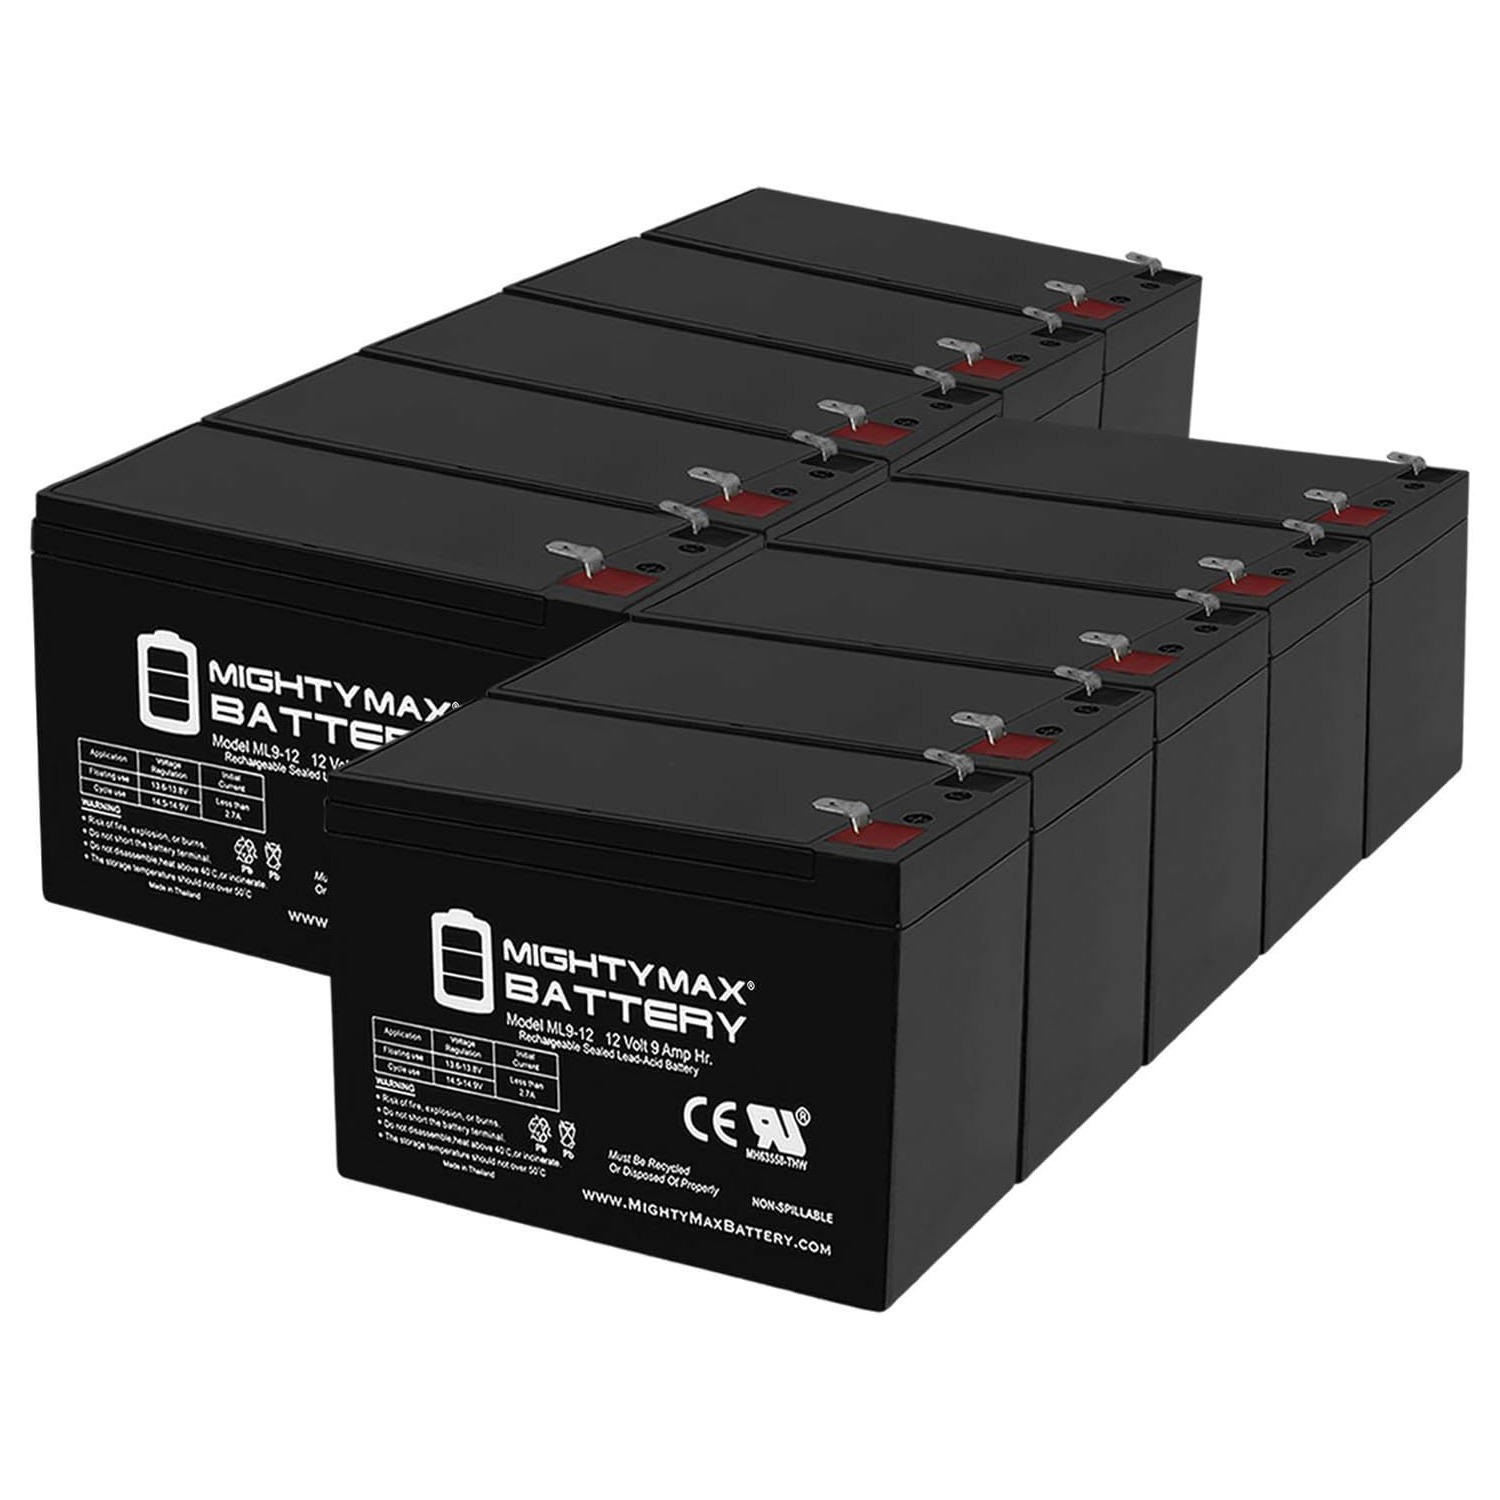 Altronix SMP7PMCTXPD16 12V, 9Ah Lead Acid Battery - 10 Pack